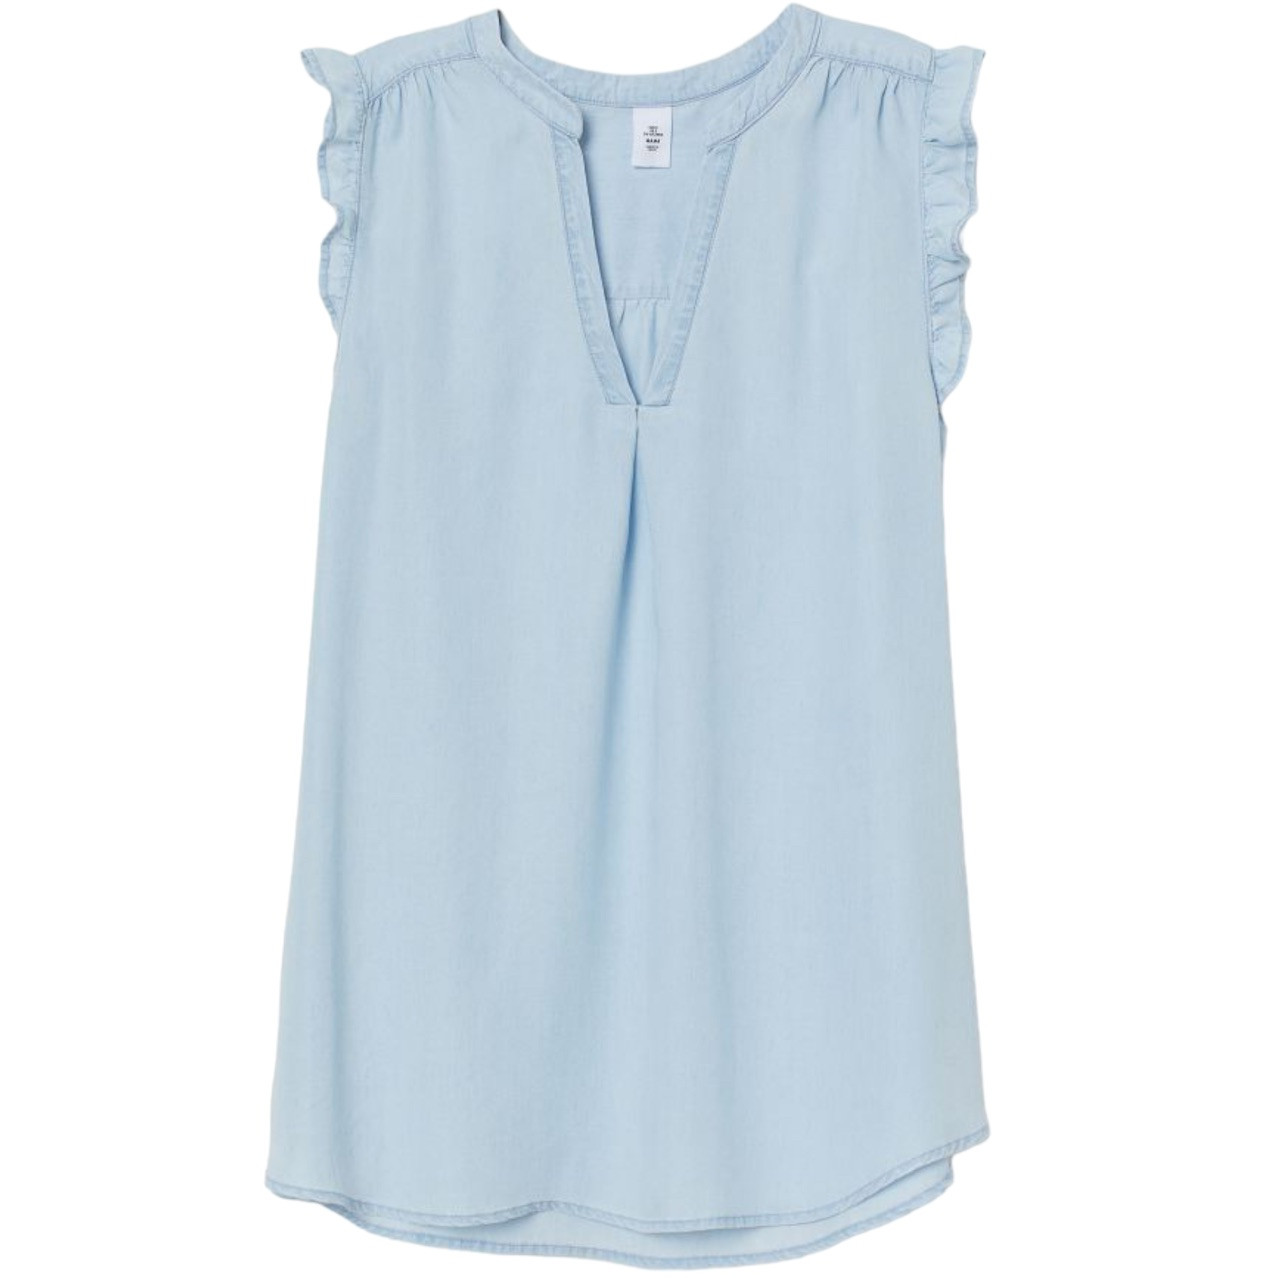 H&M Mama Lyocell Short Butterfly Sleeves Maternity Top Denim